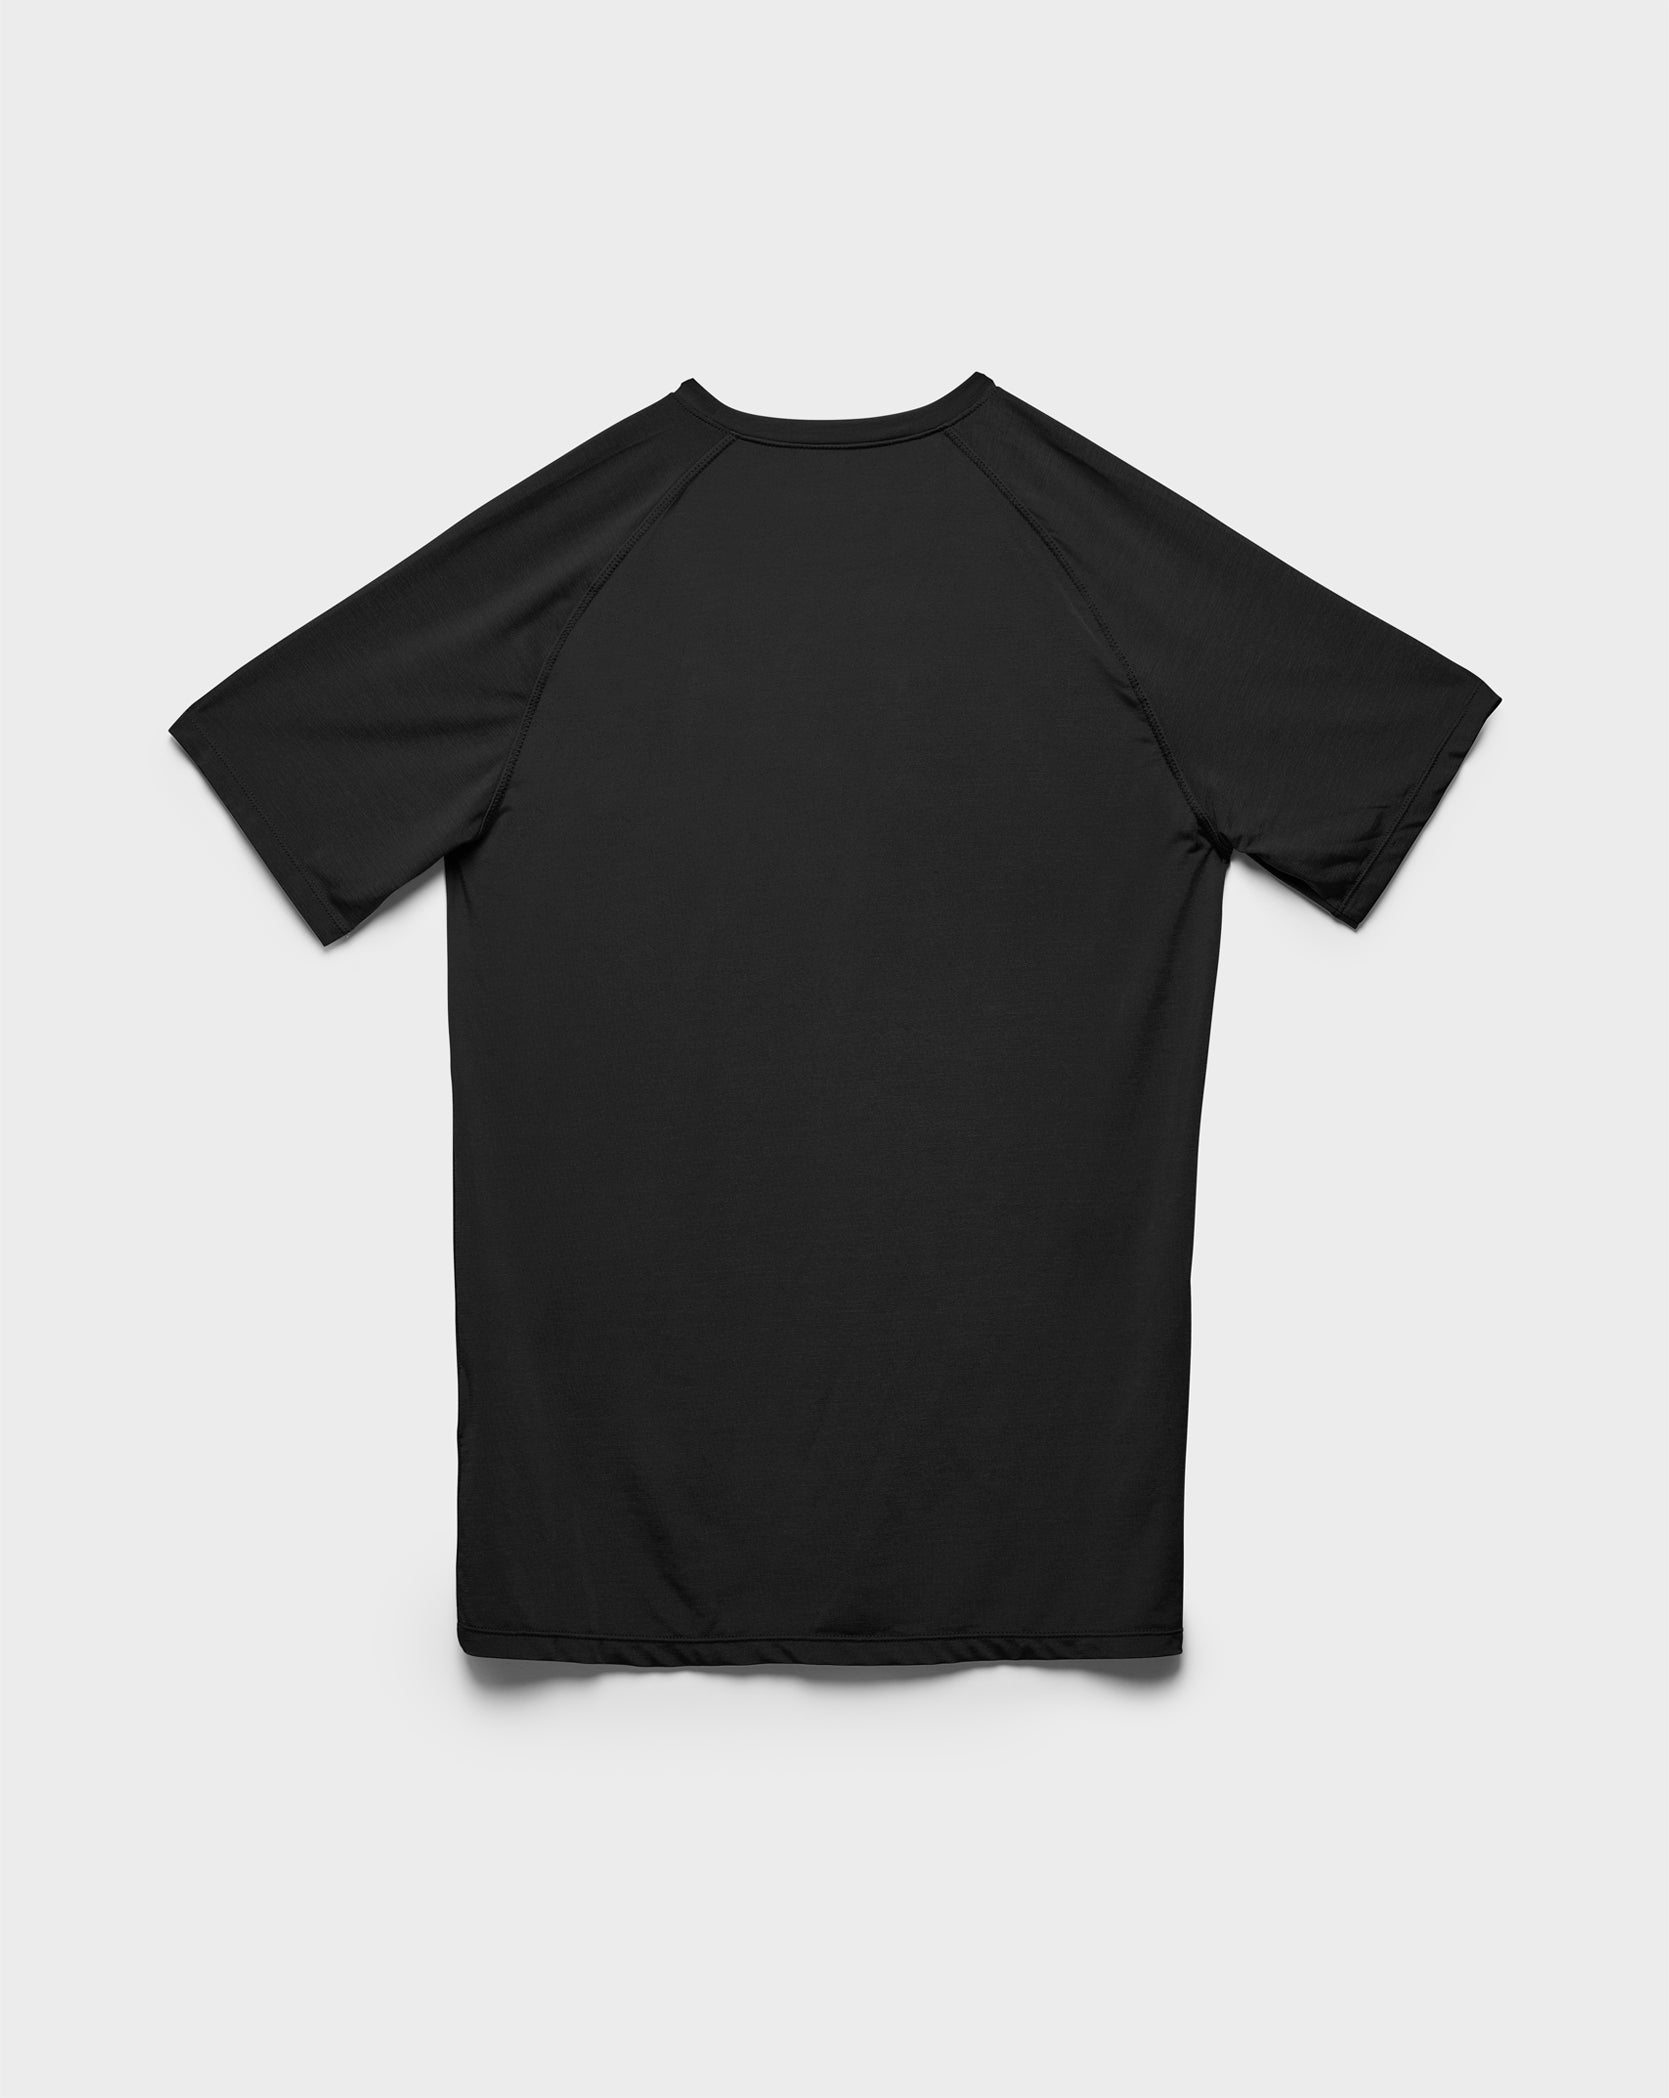 Twinzz active black t-shirt back